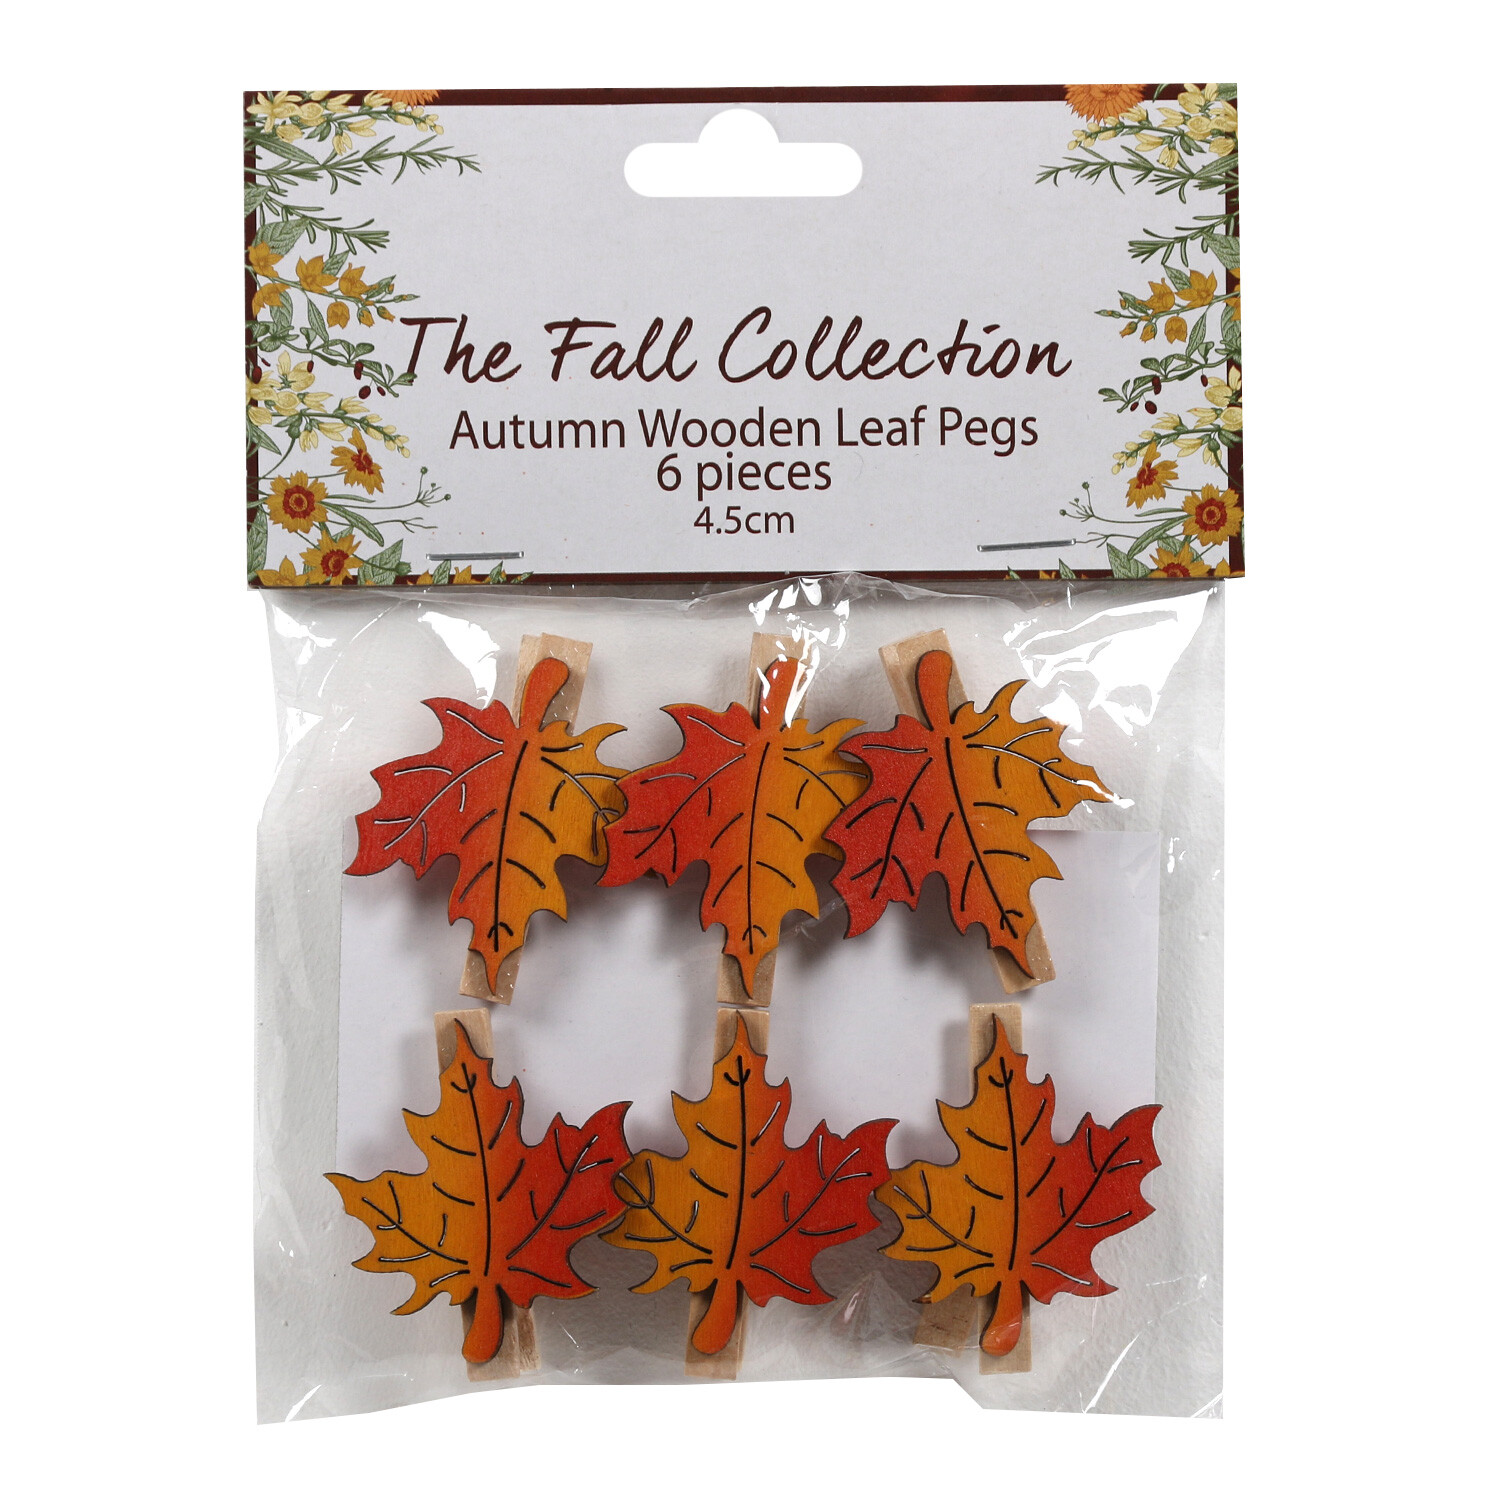 Autumn Wooden Leaf Pegs Image